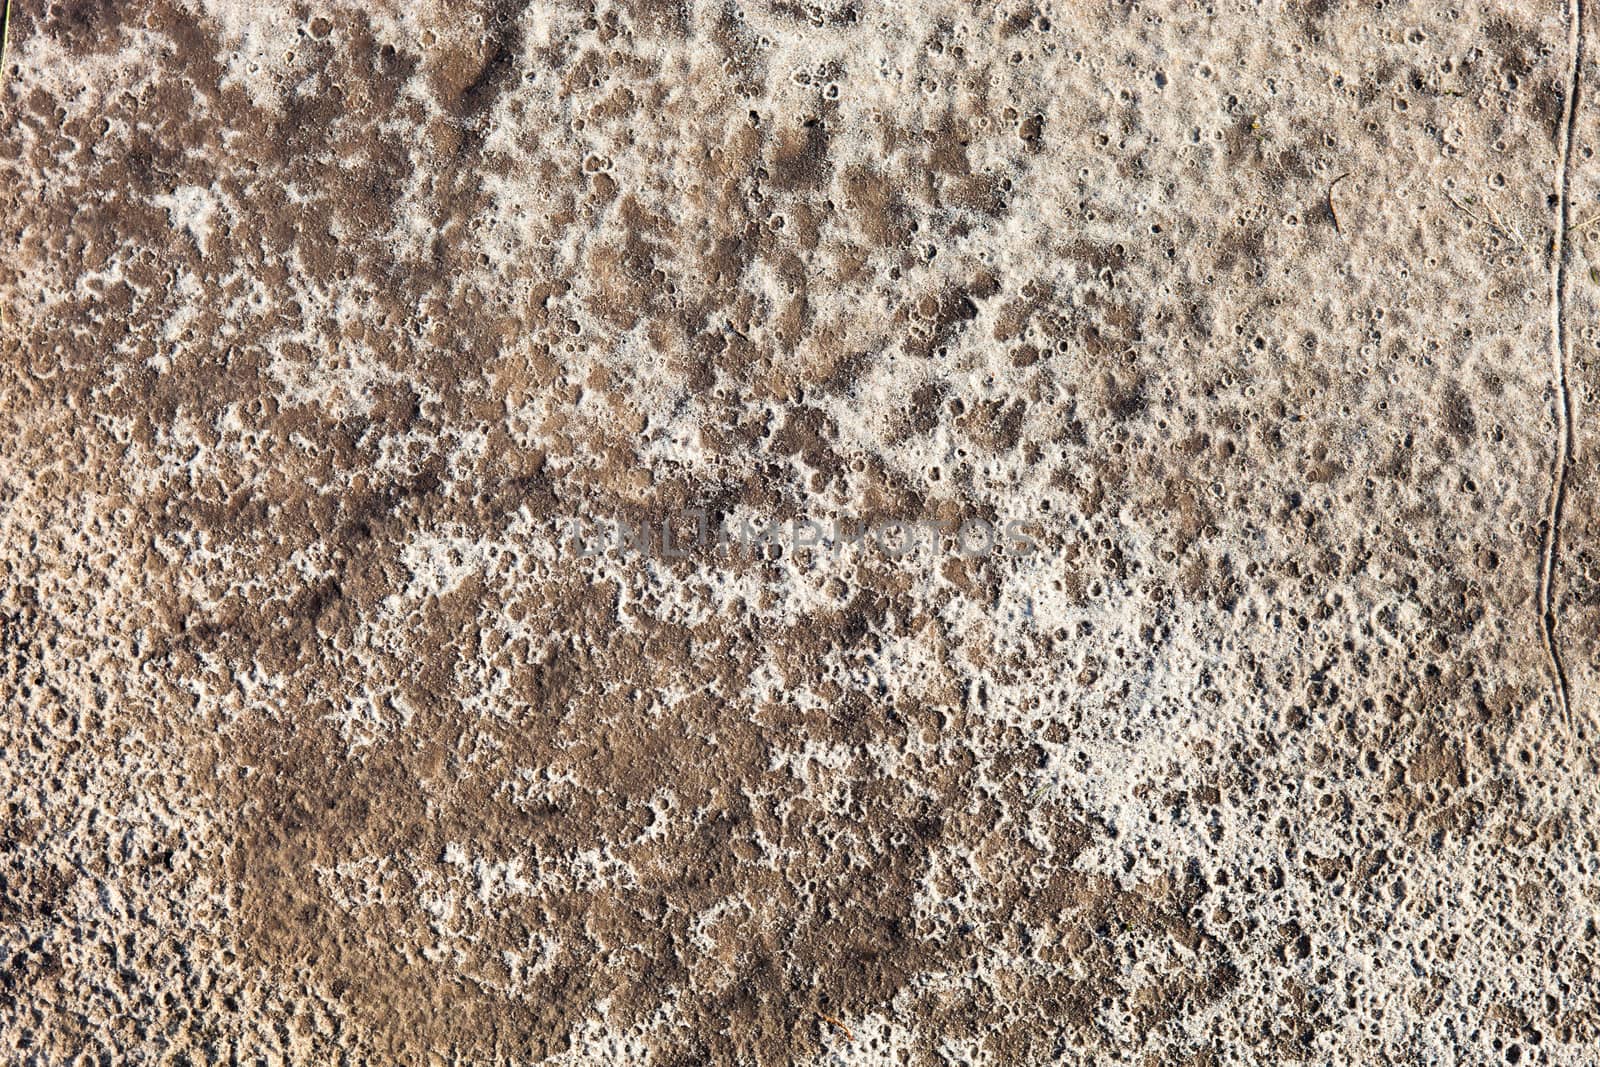 Sand surface after the rain by rootstocks